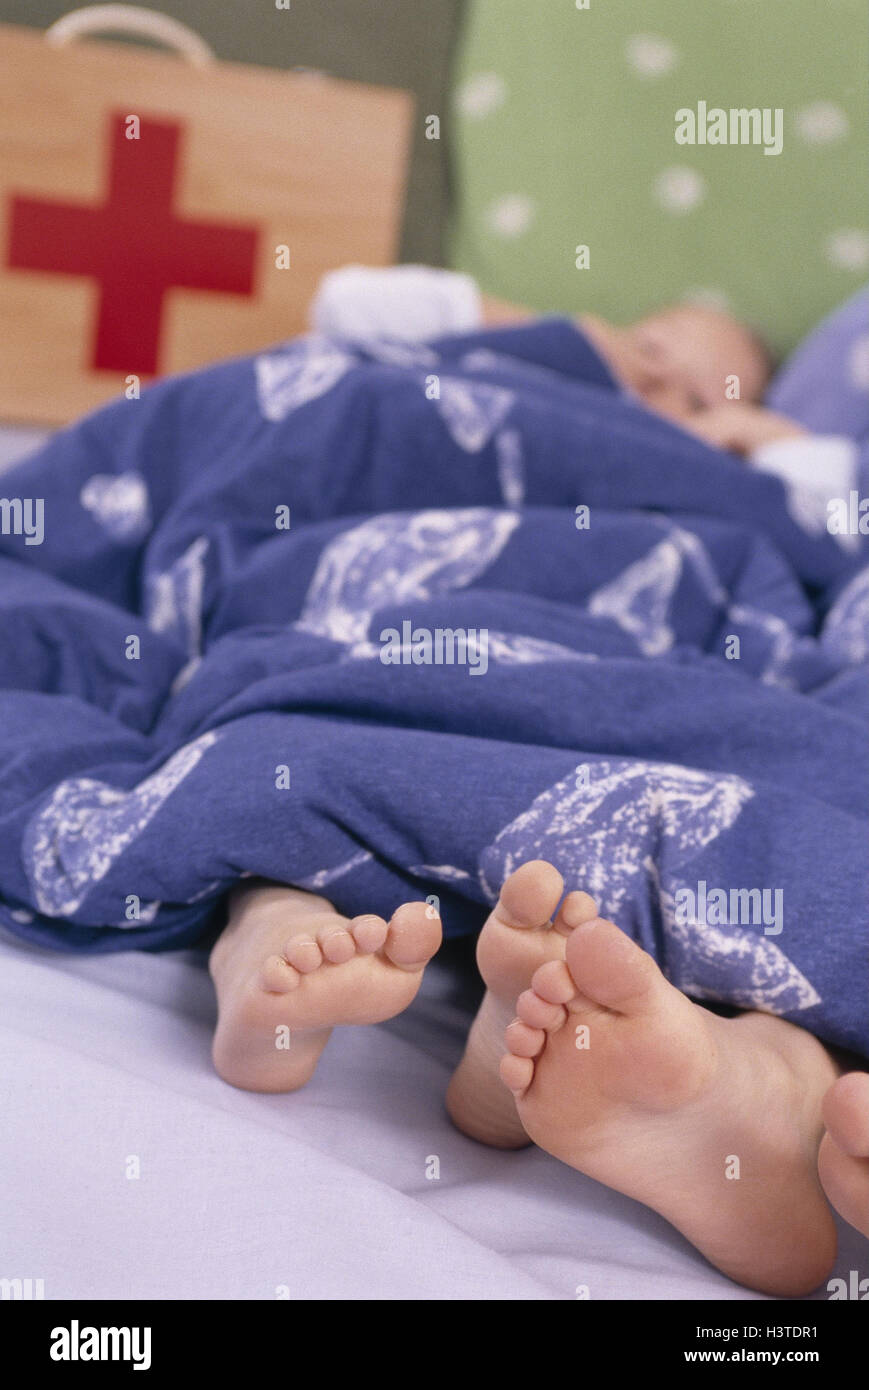 Bed, children, covered, soles, barefoot, doctor's suitcases, model released, at home, siblings, boy, girl, two, friends, game, play, ill, disease, doctor's game Stock Photo